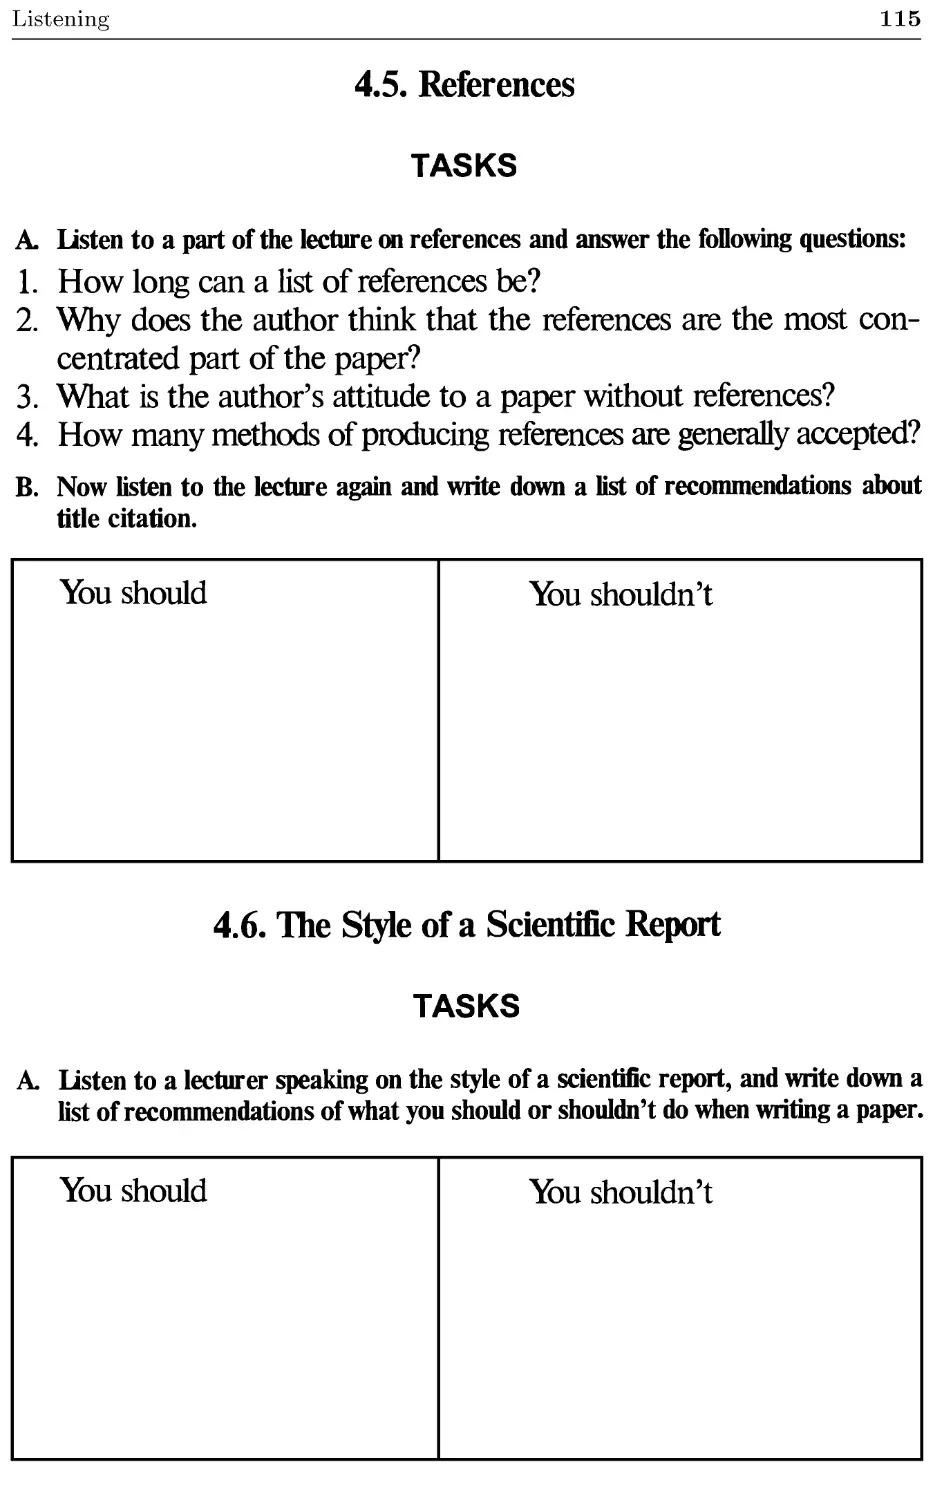 5. References
6. The Style of a Scientific Report